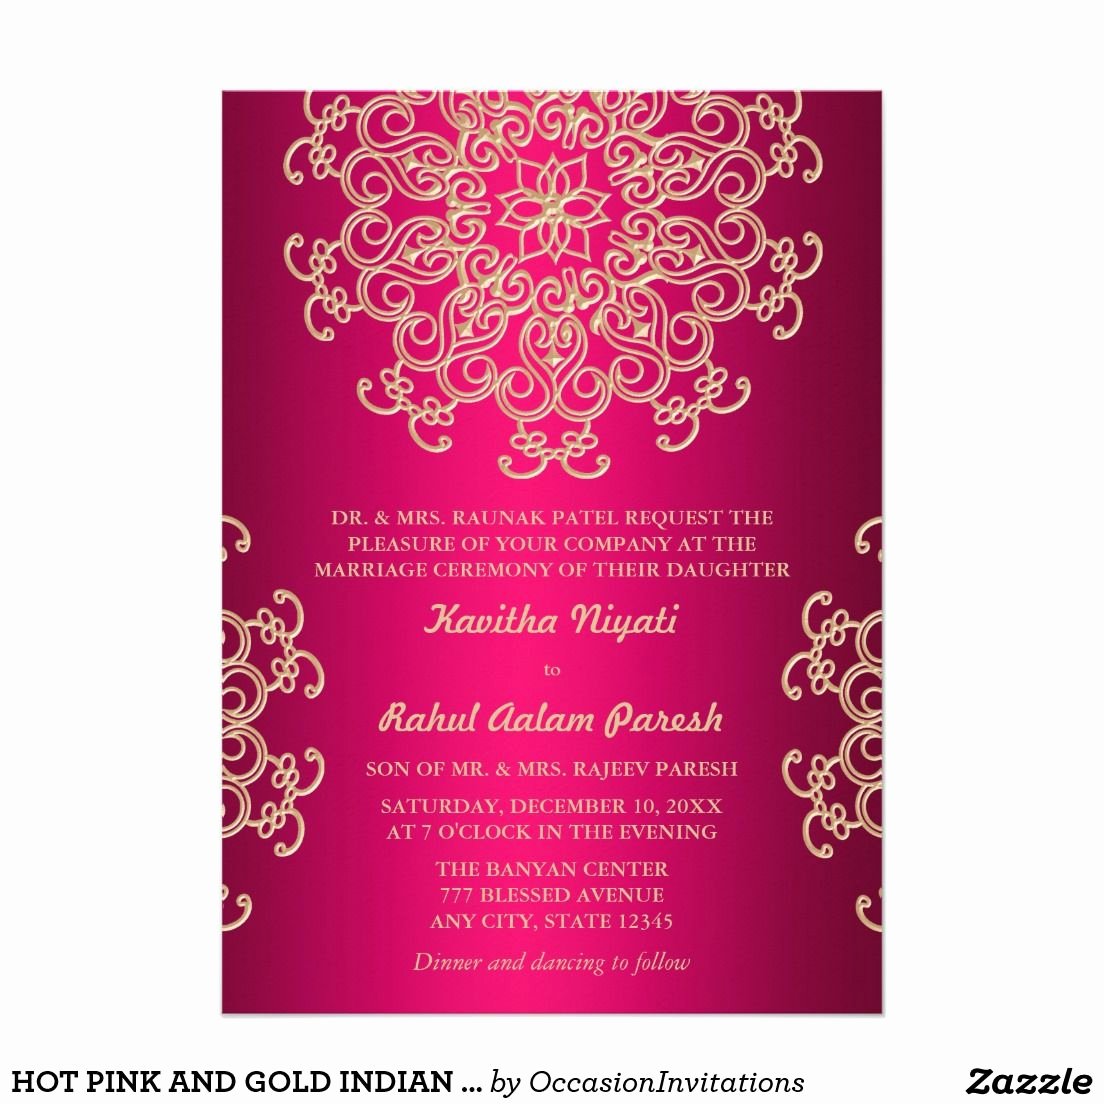 Hot Pink and Gold Indian Style Wedding Invitation